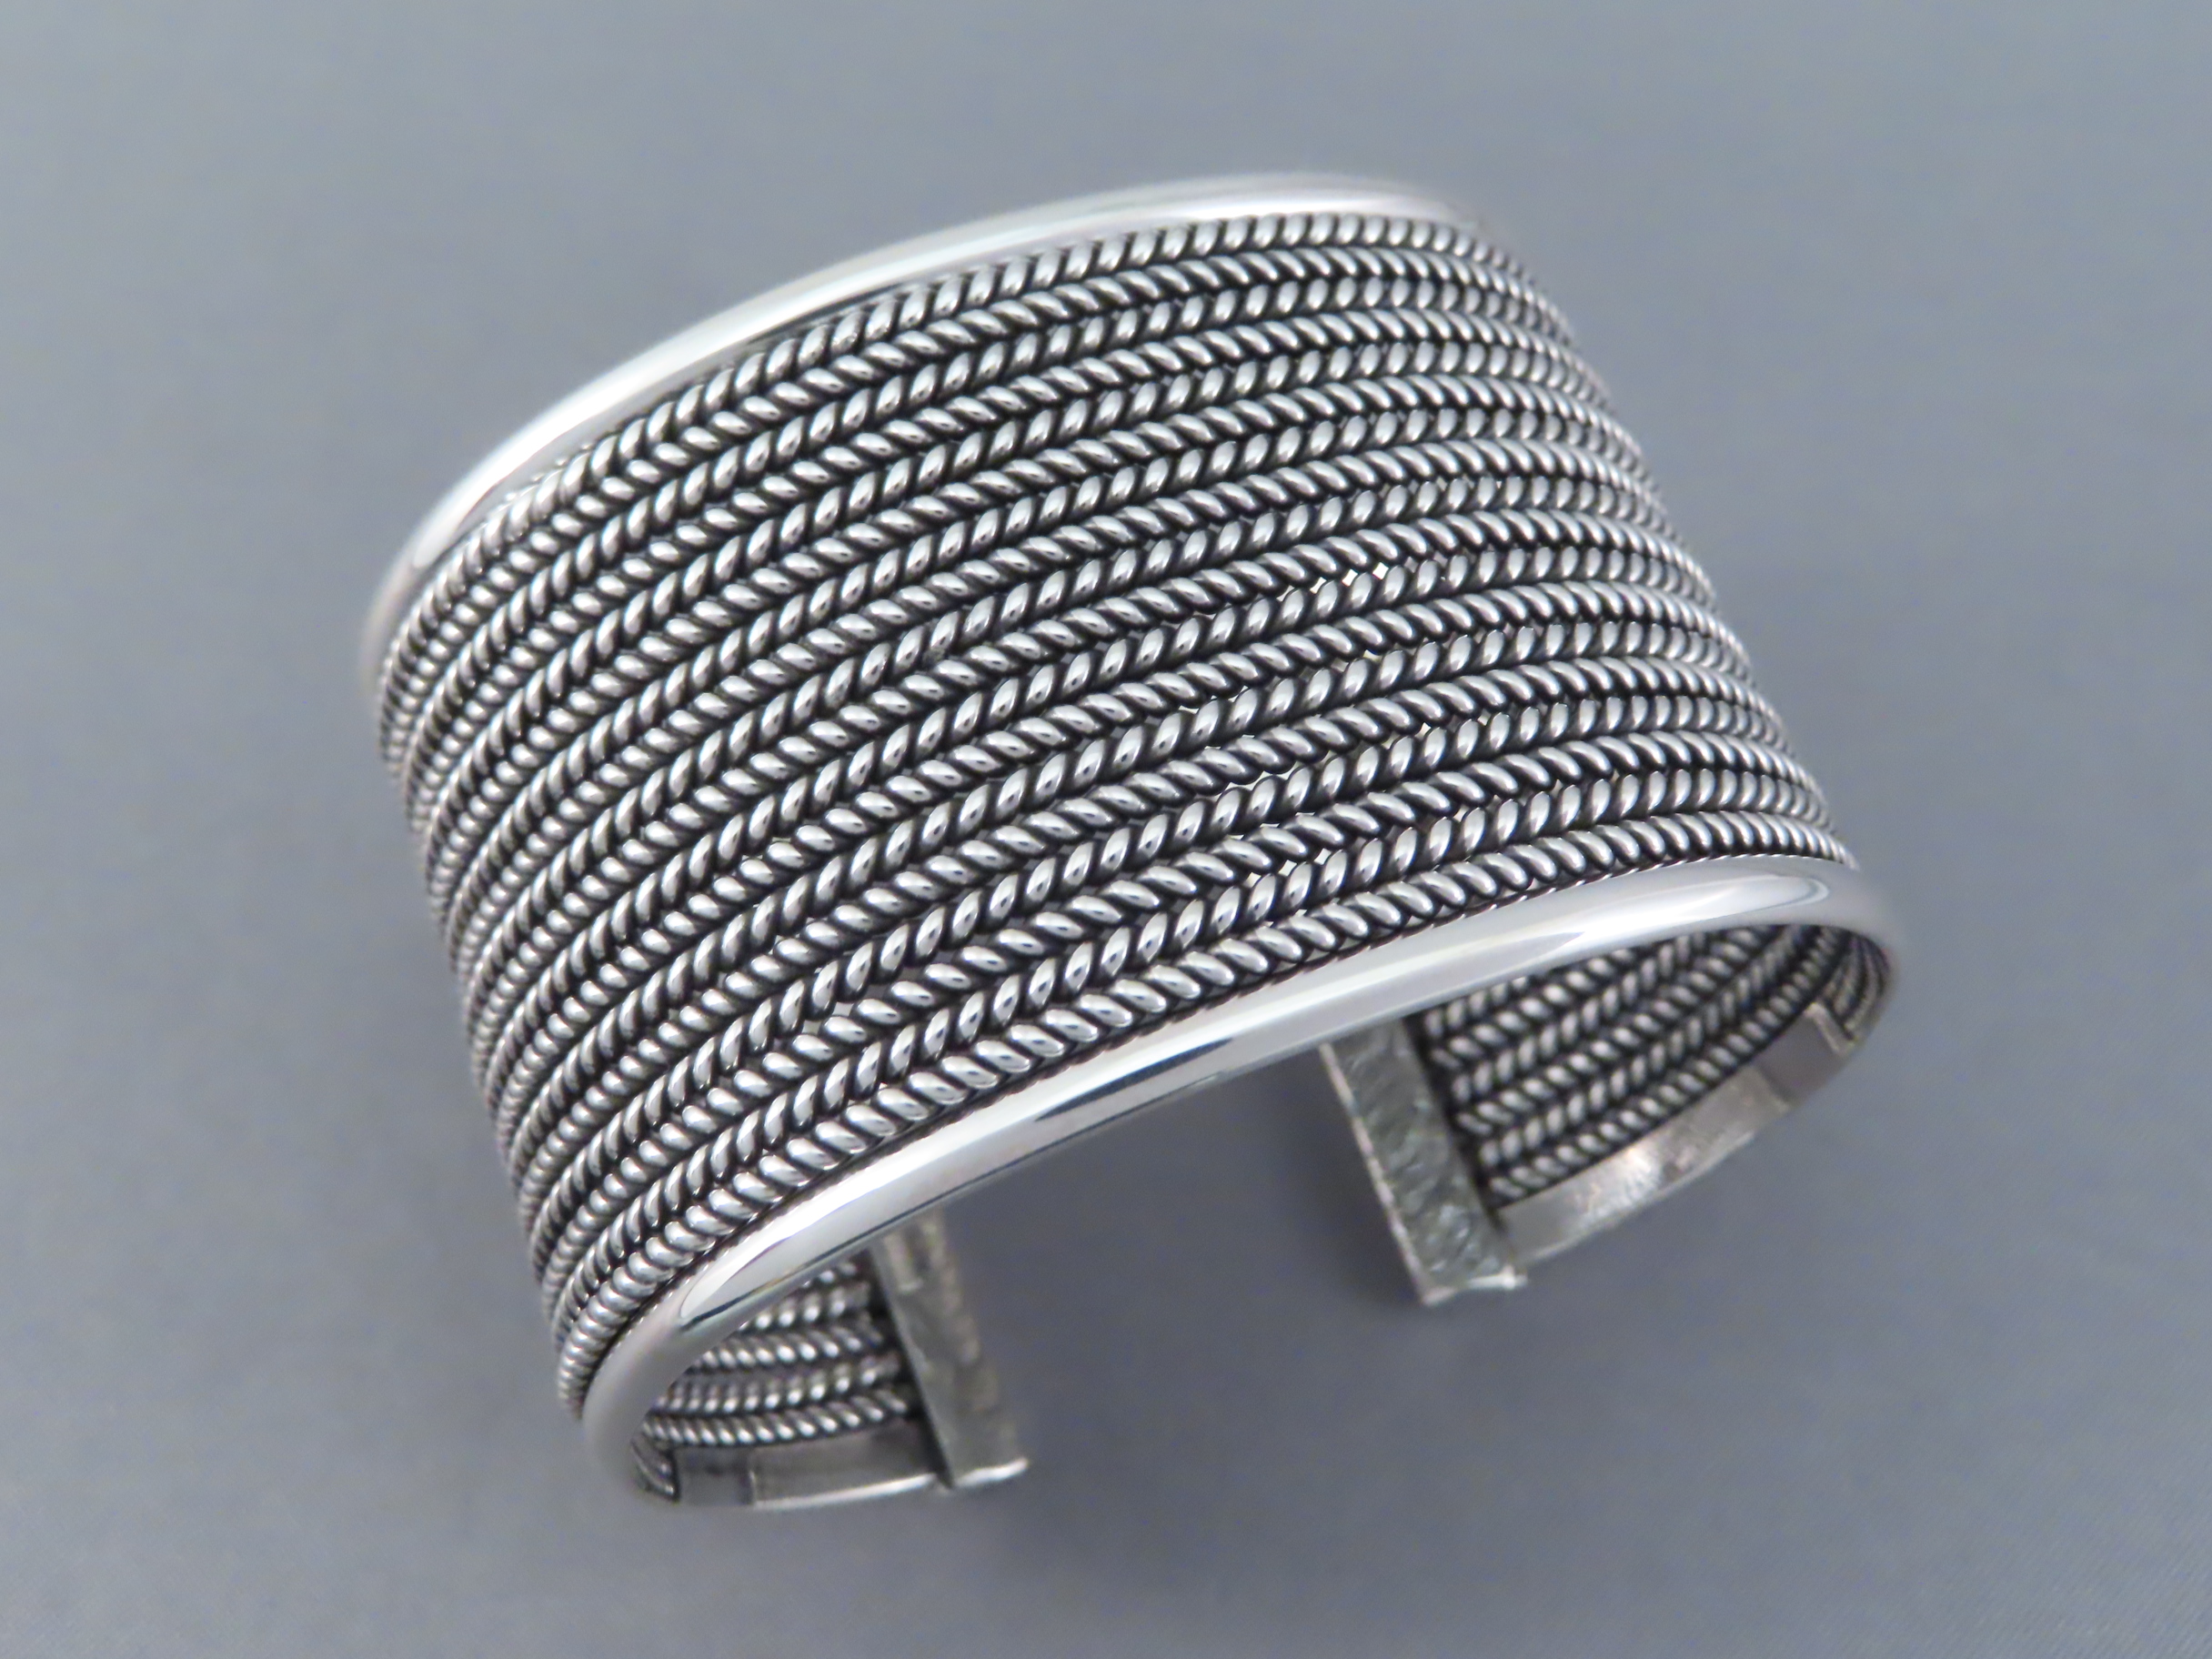 Buy Native American Jewelry - Wide Sterling Silver Bracelet 'Mesh Cuff' by Navajo jeweler, Artie Yellowhorse FOR SALE $495-